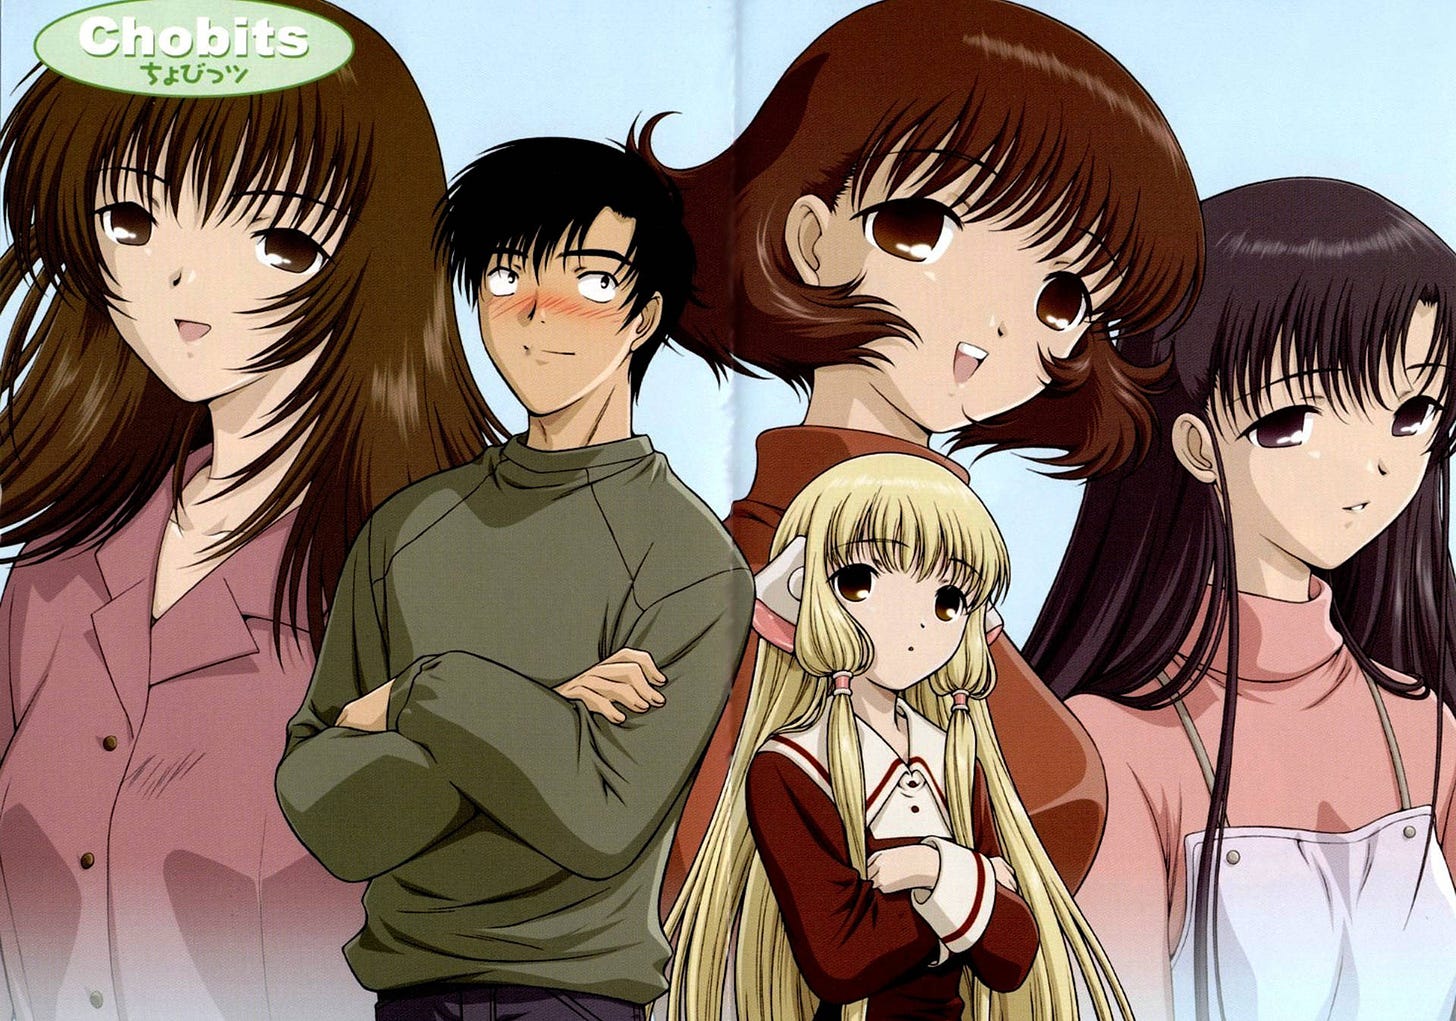 Download Chobits Anime Characters Wallpaper | Wallpapers.com